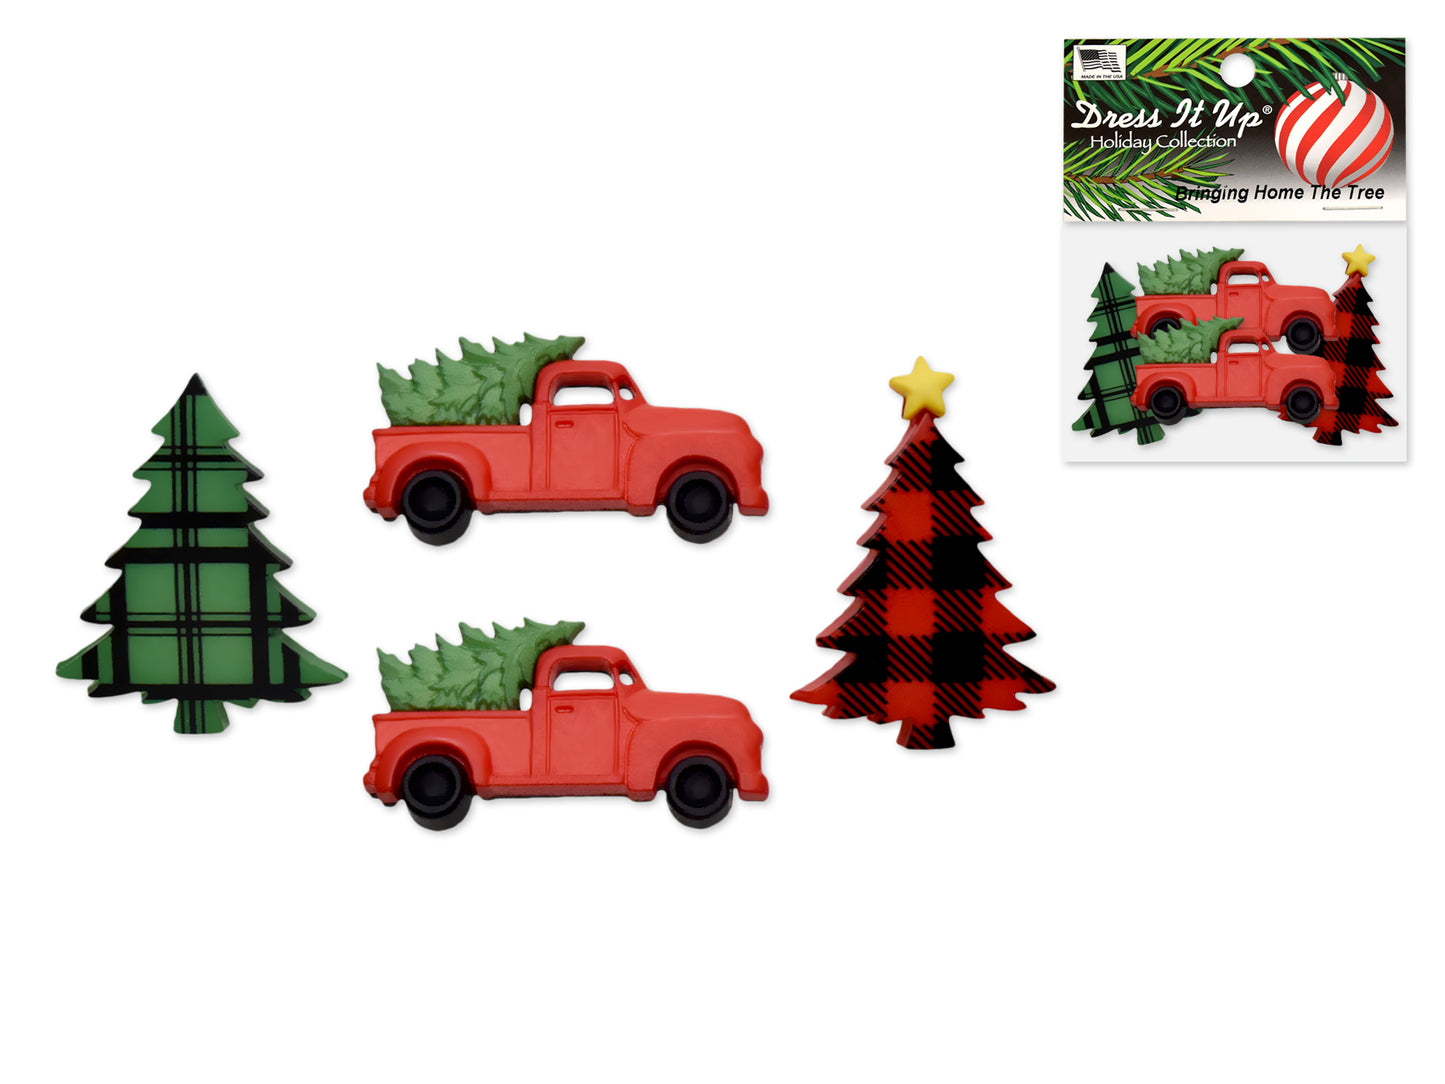 Holiday Paper Craft: Seasonal Dress-It-Up Bits Painted Embellishments Bringing Home the Tree